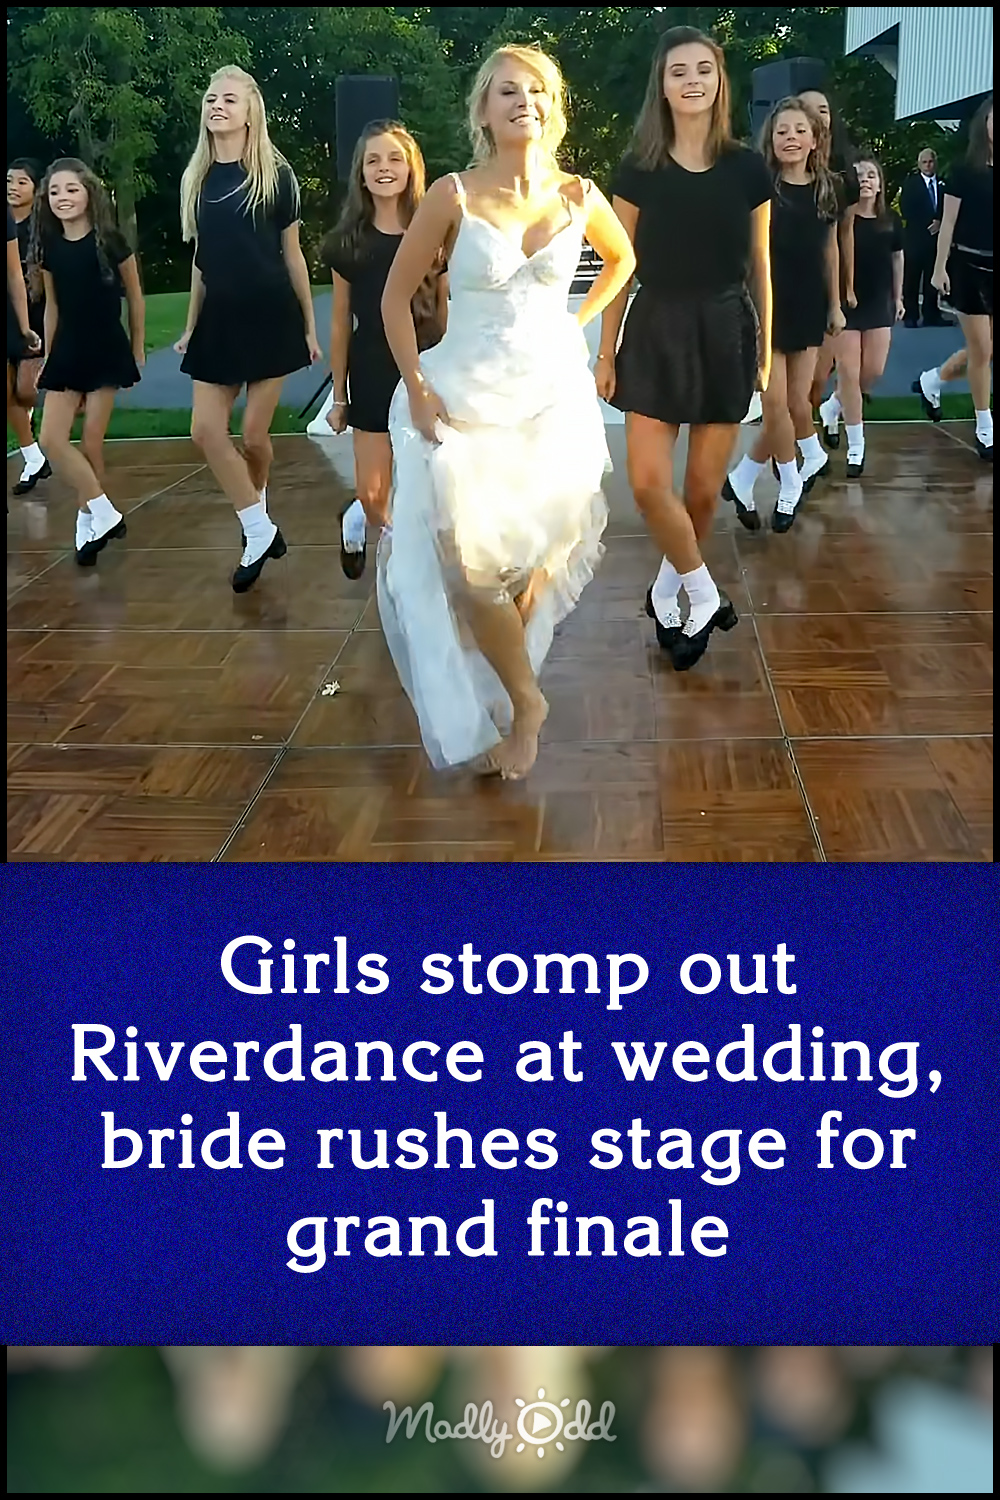 Girls stomp out Riverdance at wedding, bride rushes stage for grand finale